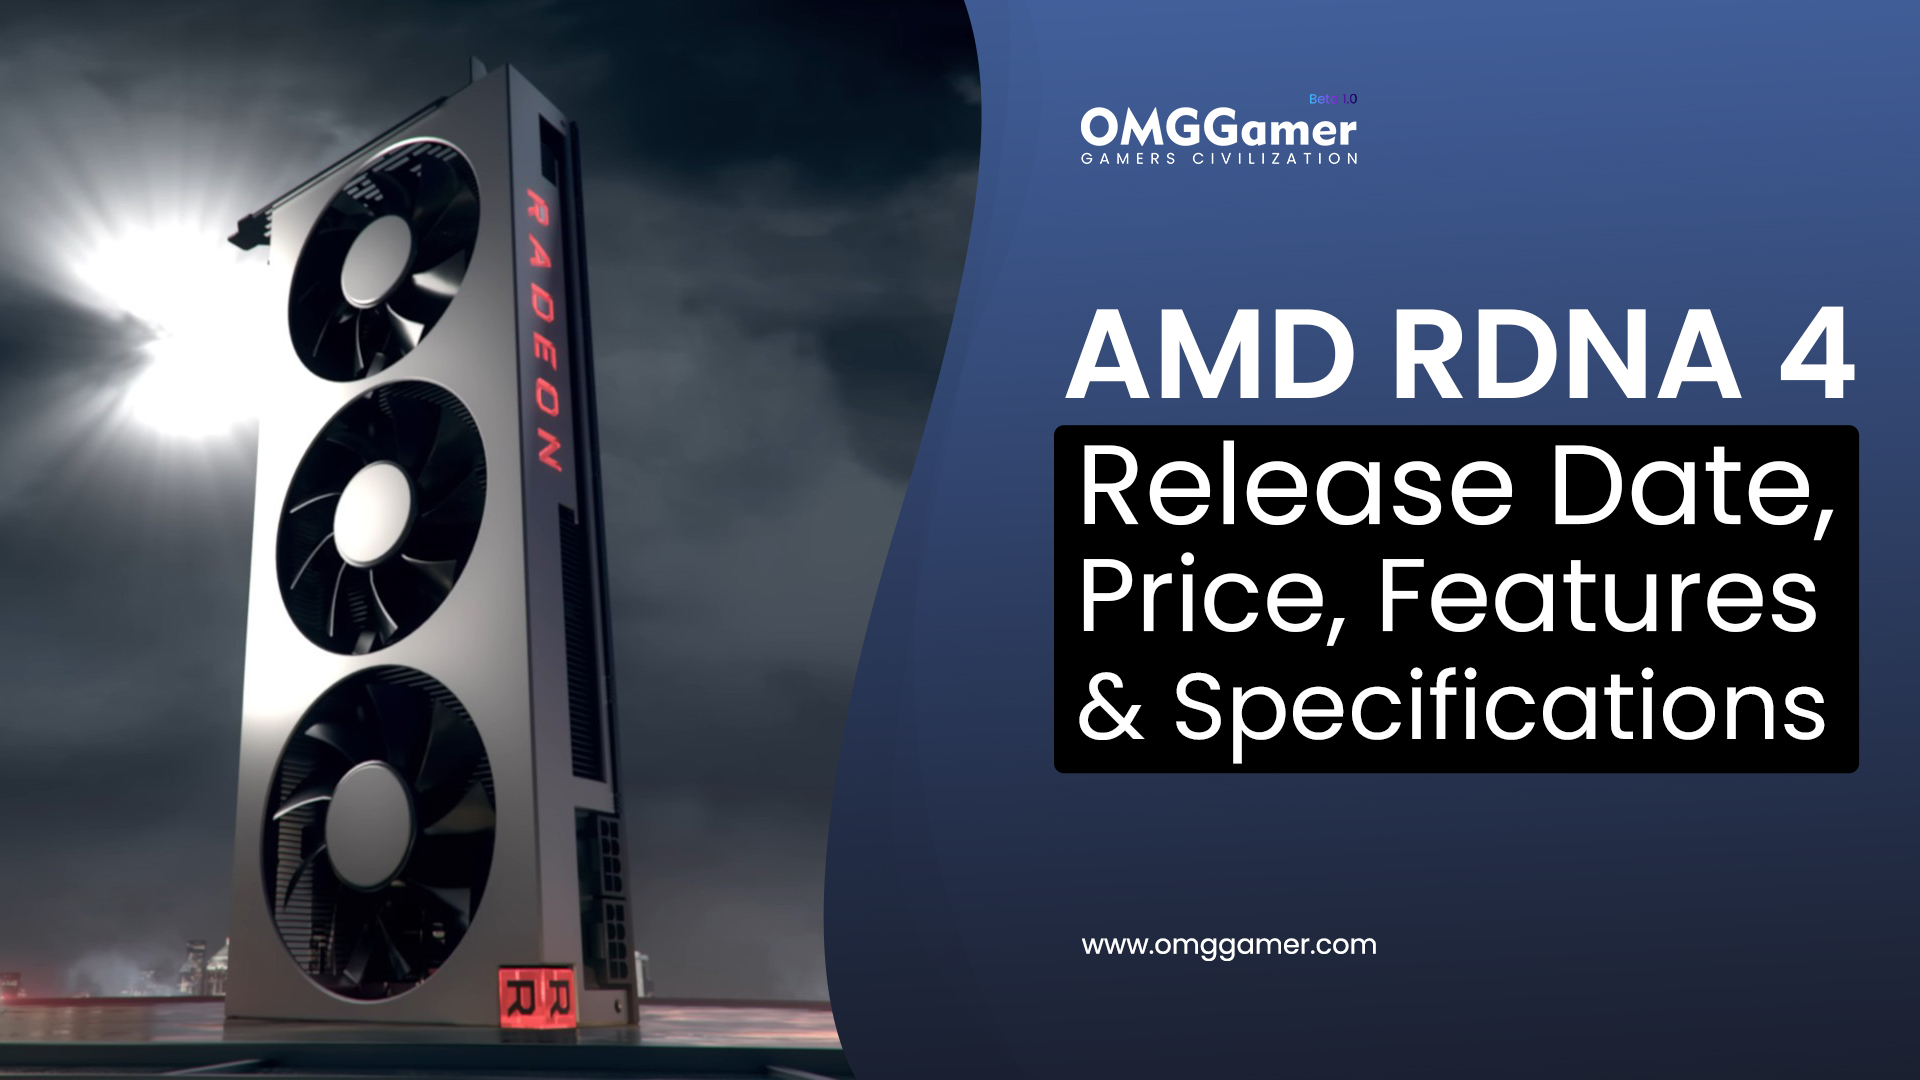 AMD RDNA 4 Release Date, Price, Features & Specifications